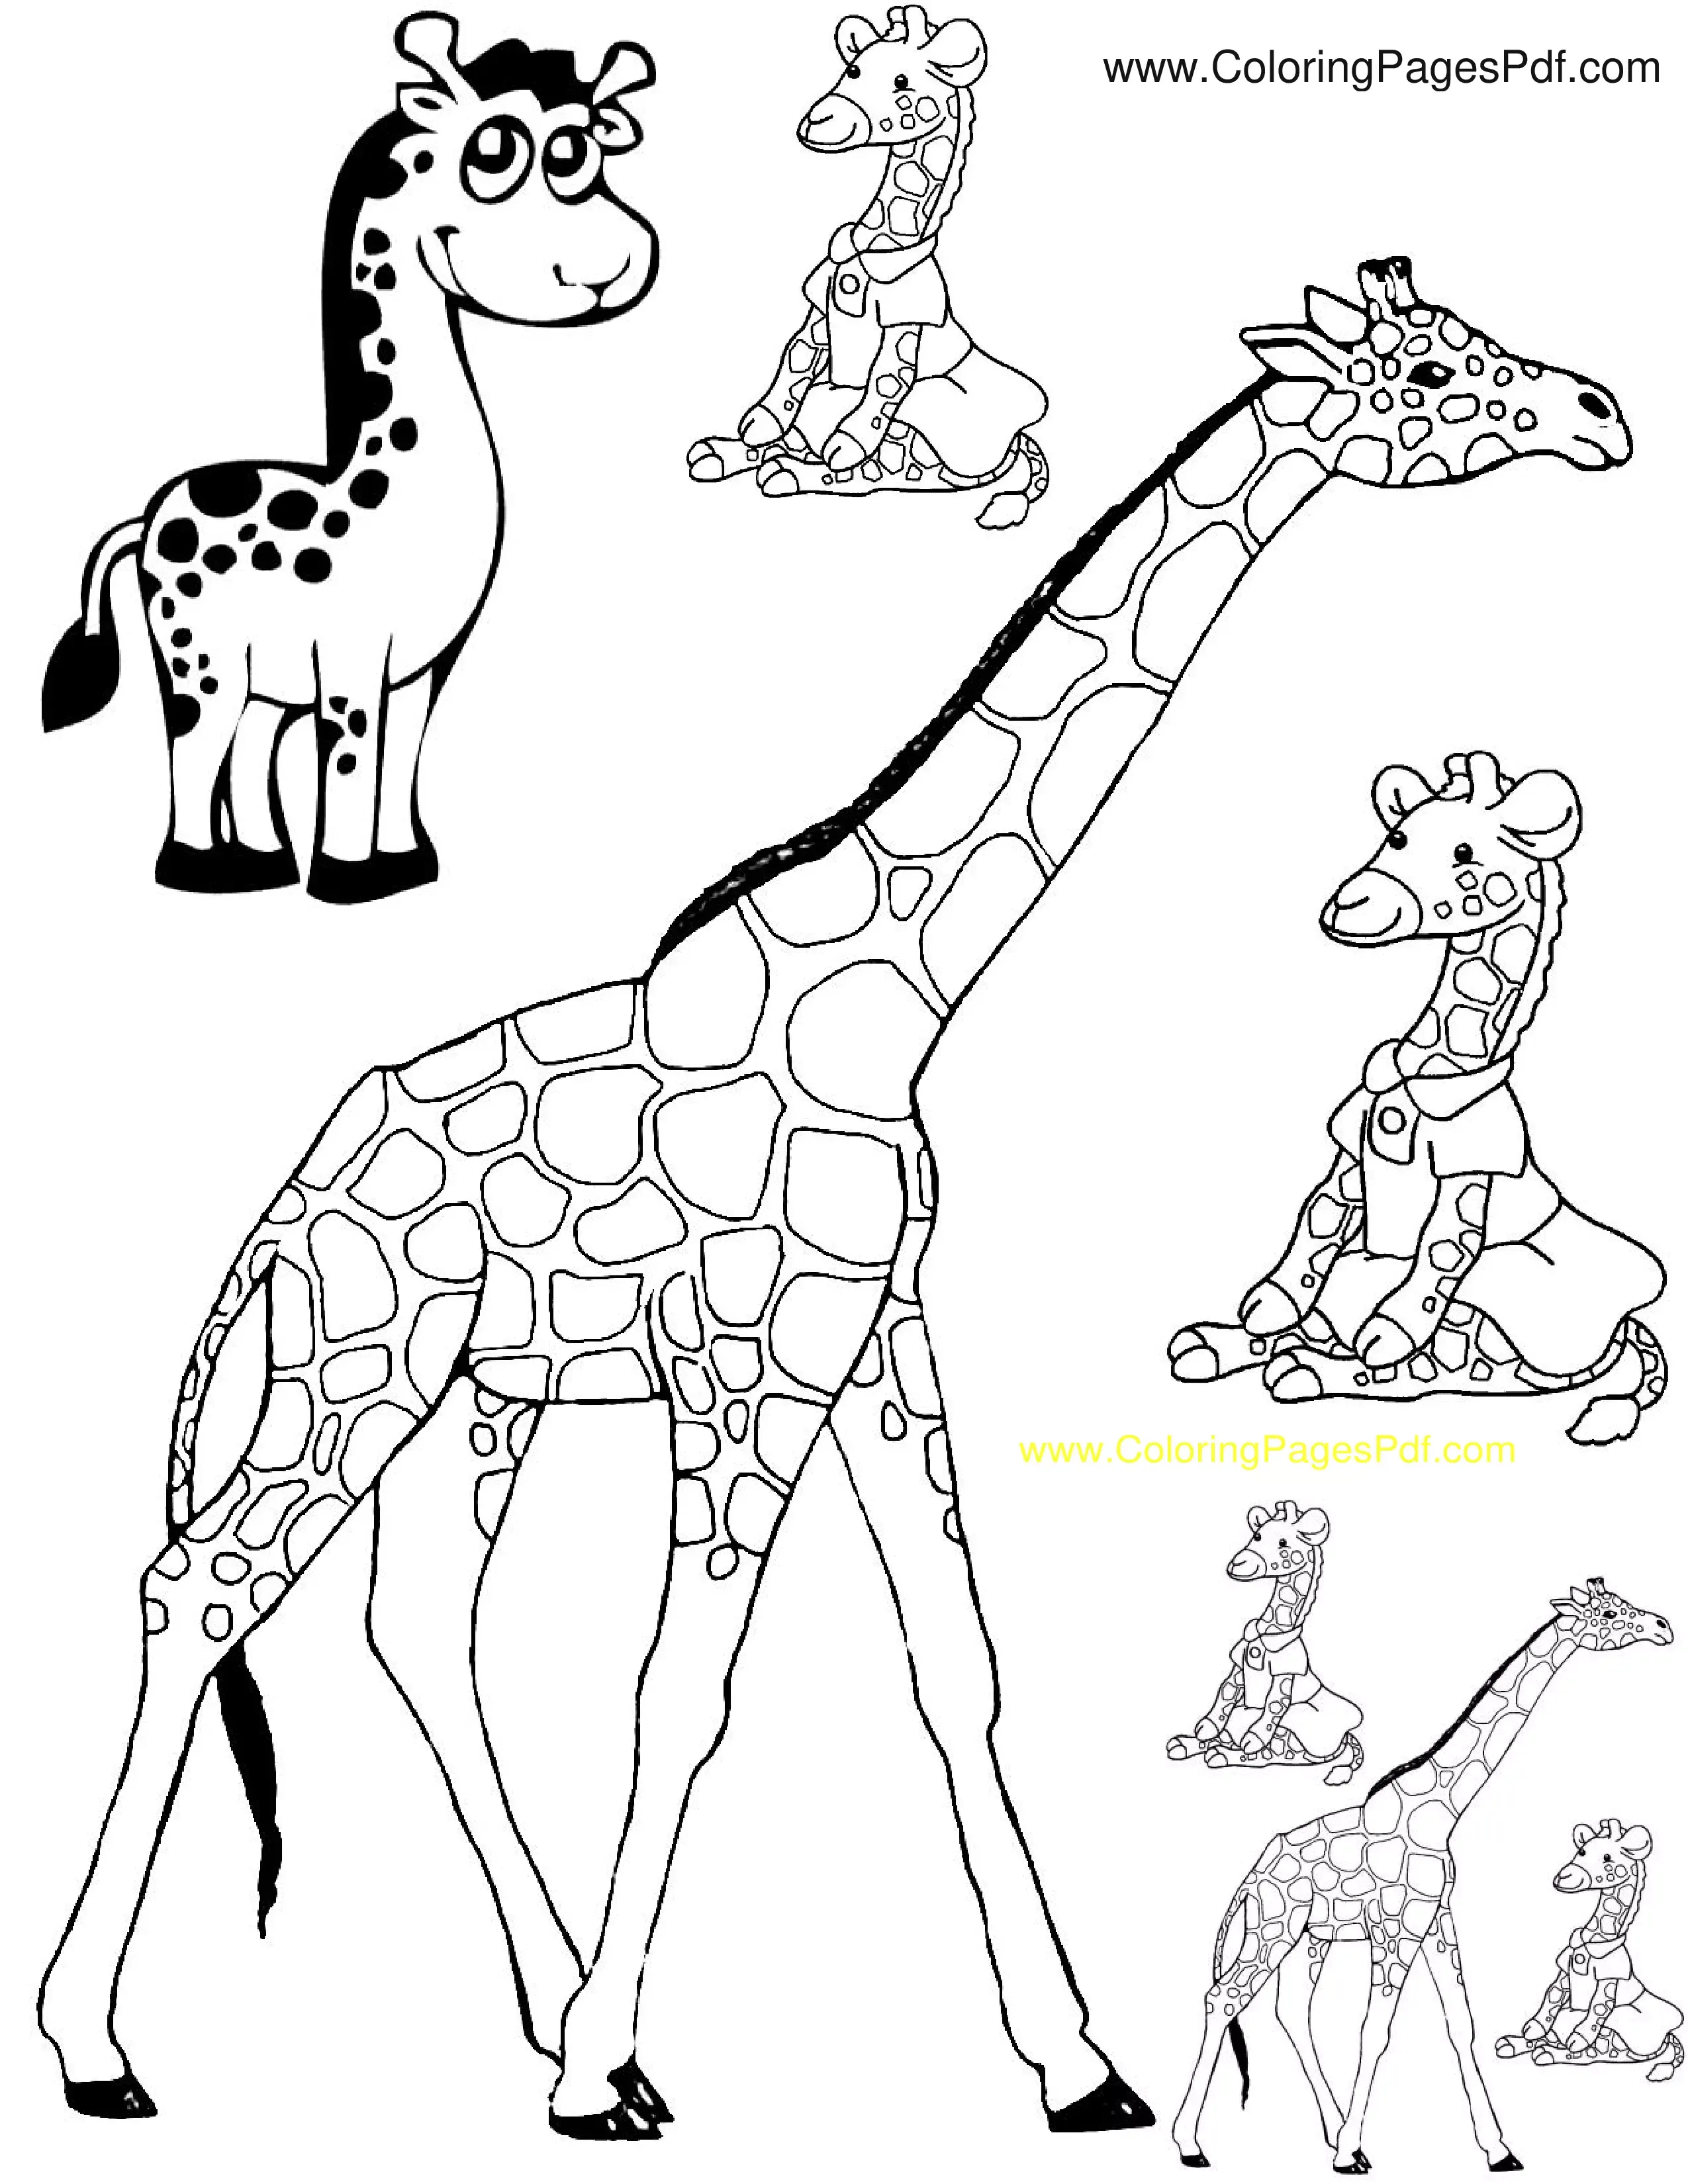 Realistic giraffe coloring pages